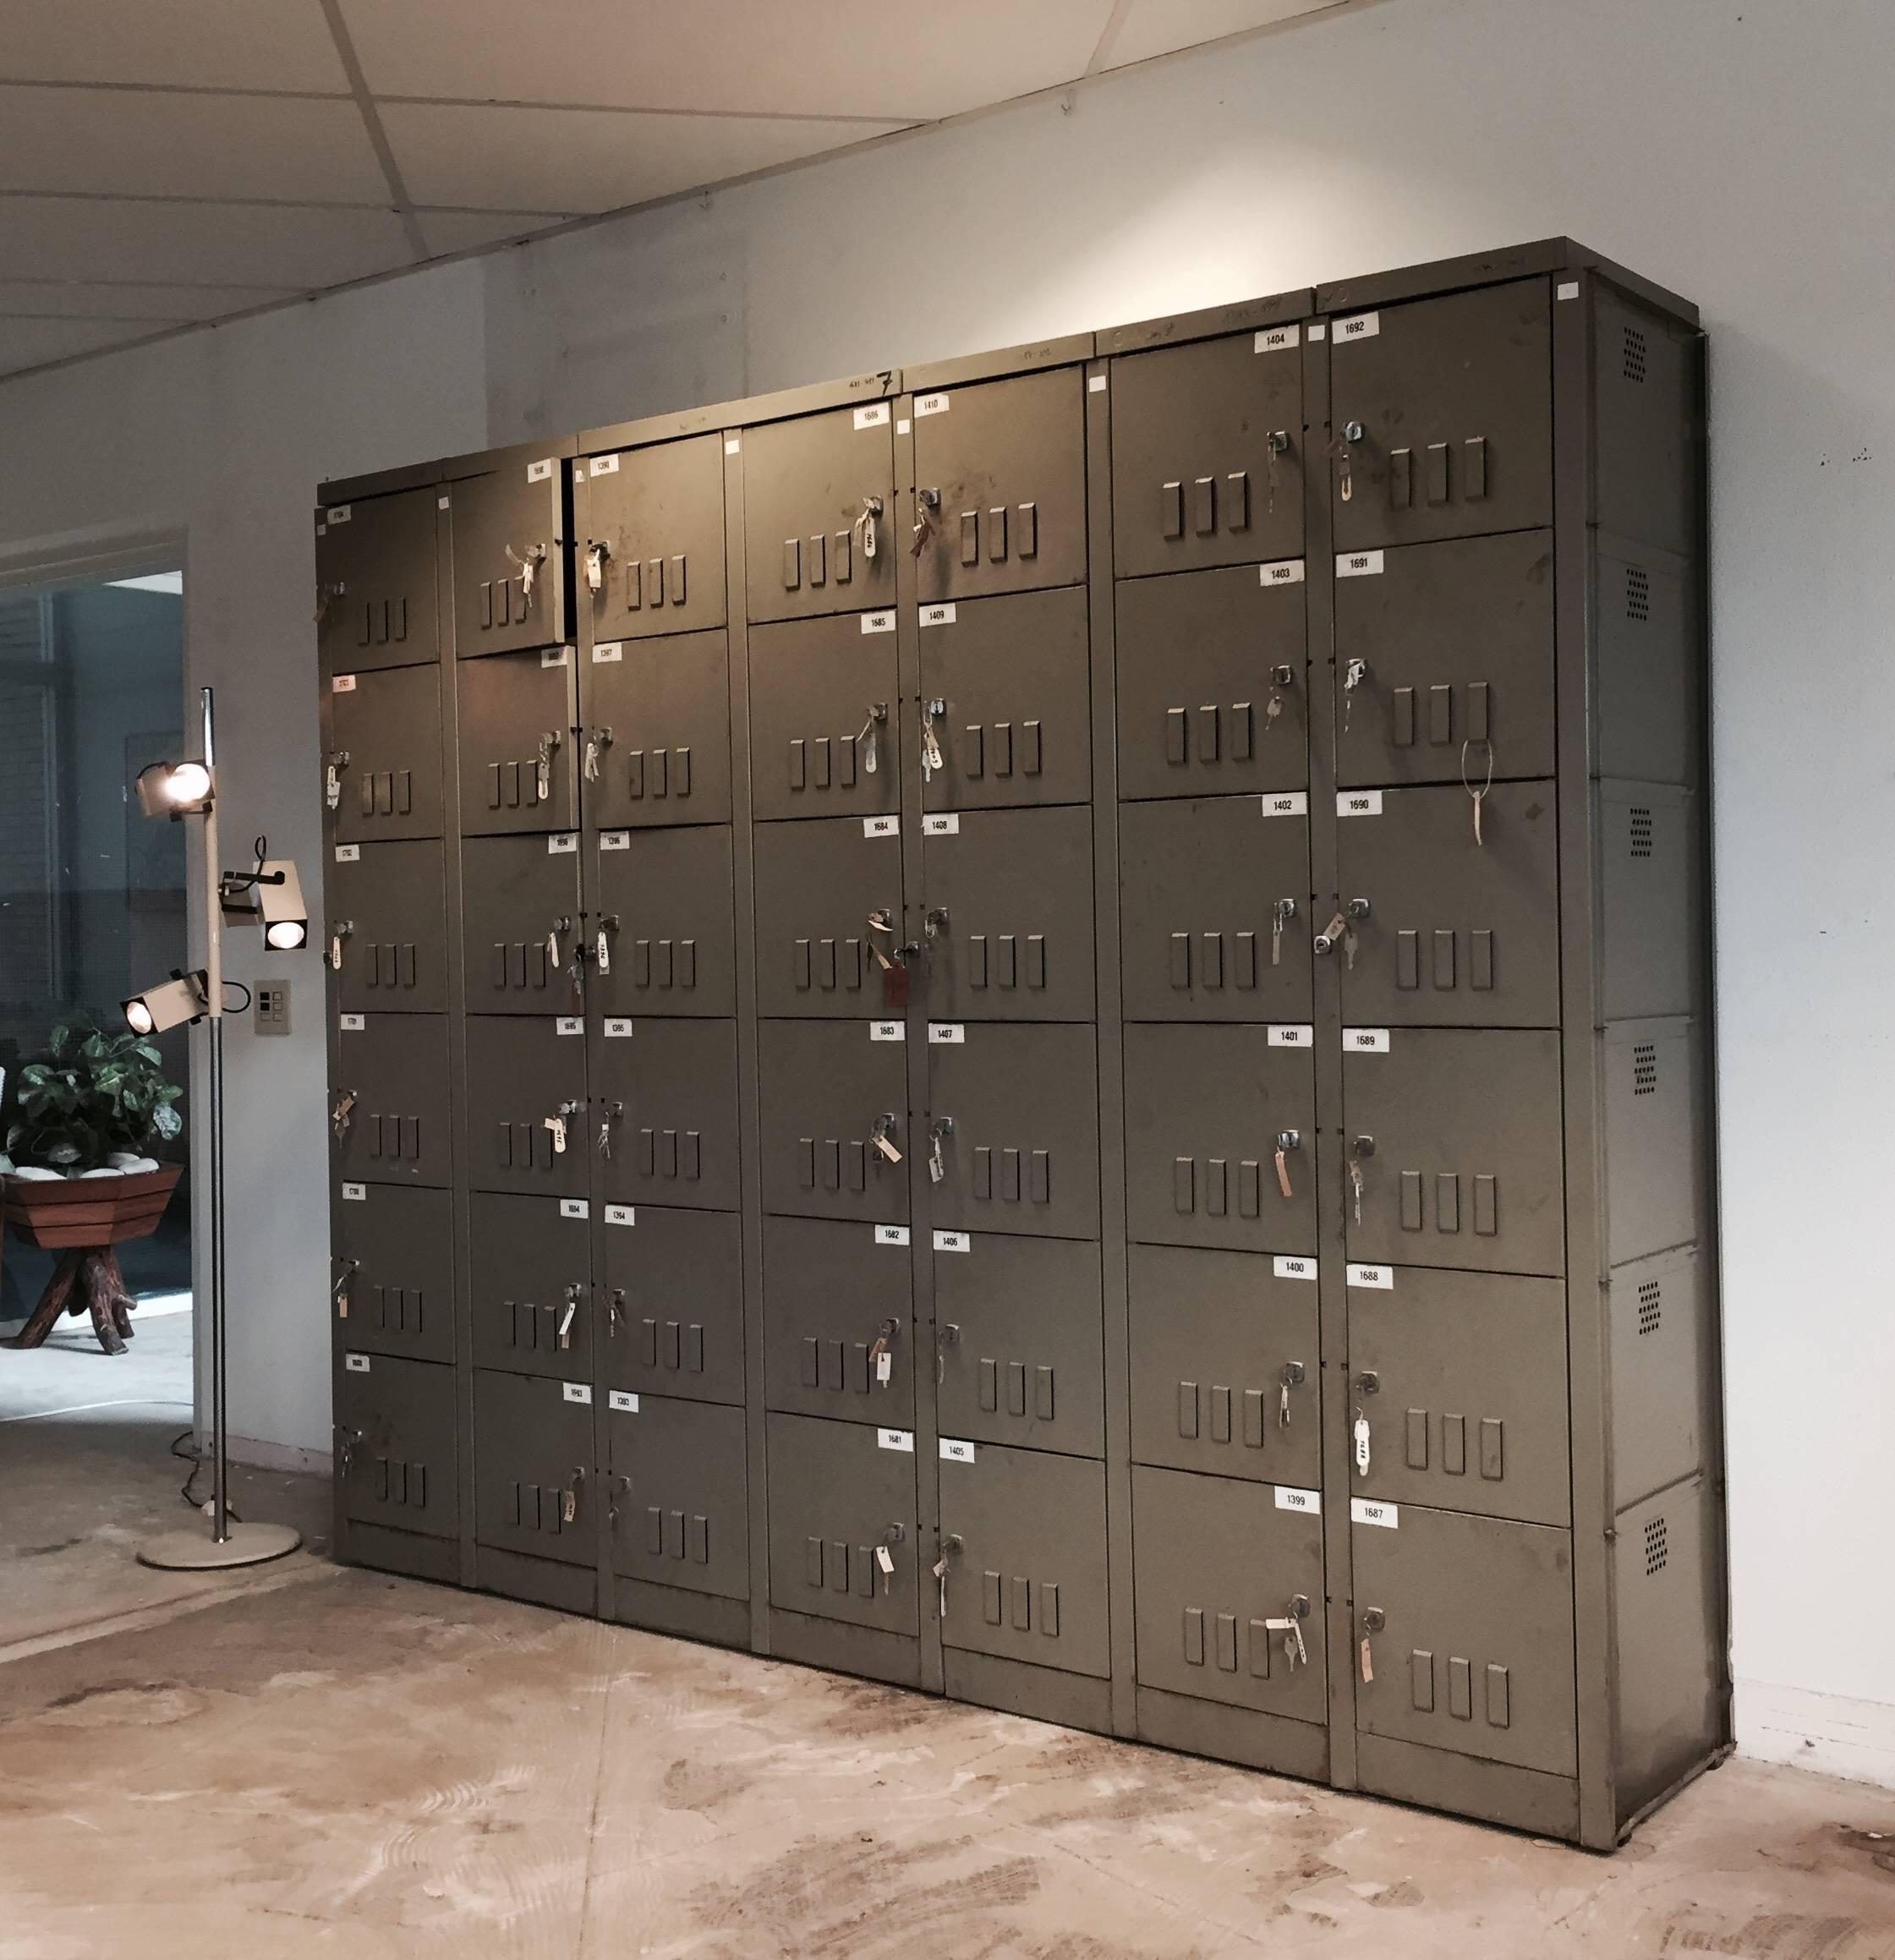 This large industrial cabinet was manufactured by Mewaf in Belgium in the 1950s. It is believed that the cabinet was used in a Belgian coal mine. The cabinet features 42 lockers which all come with the original key.

The position of the lockers can